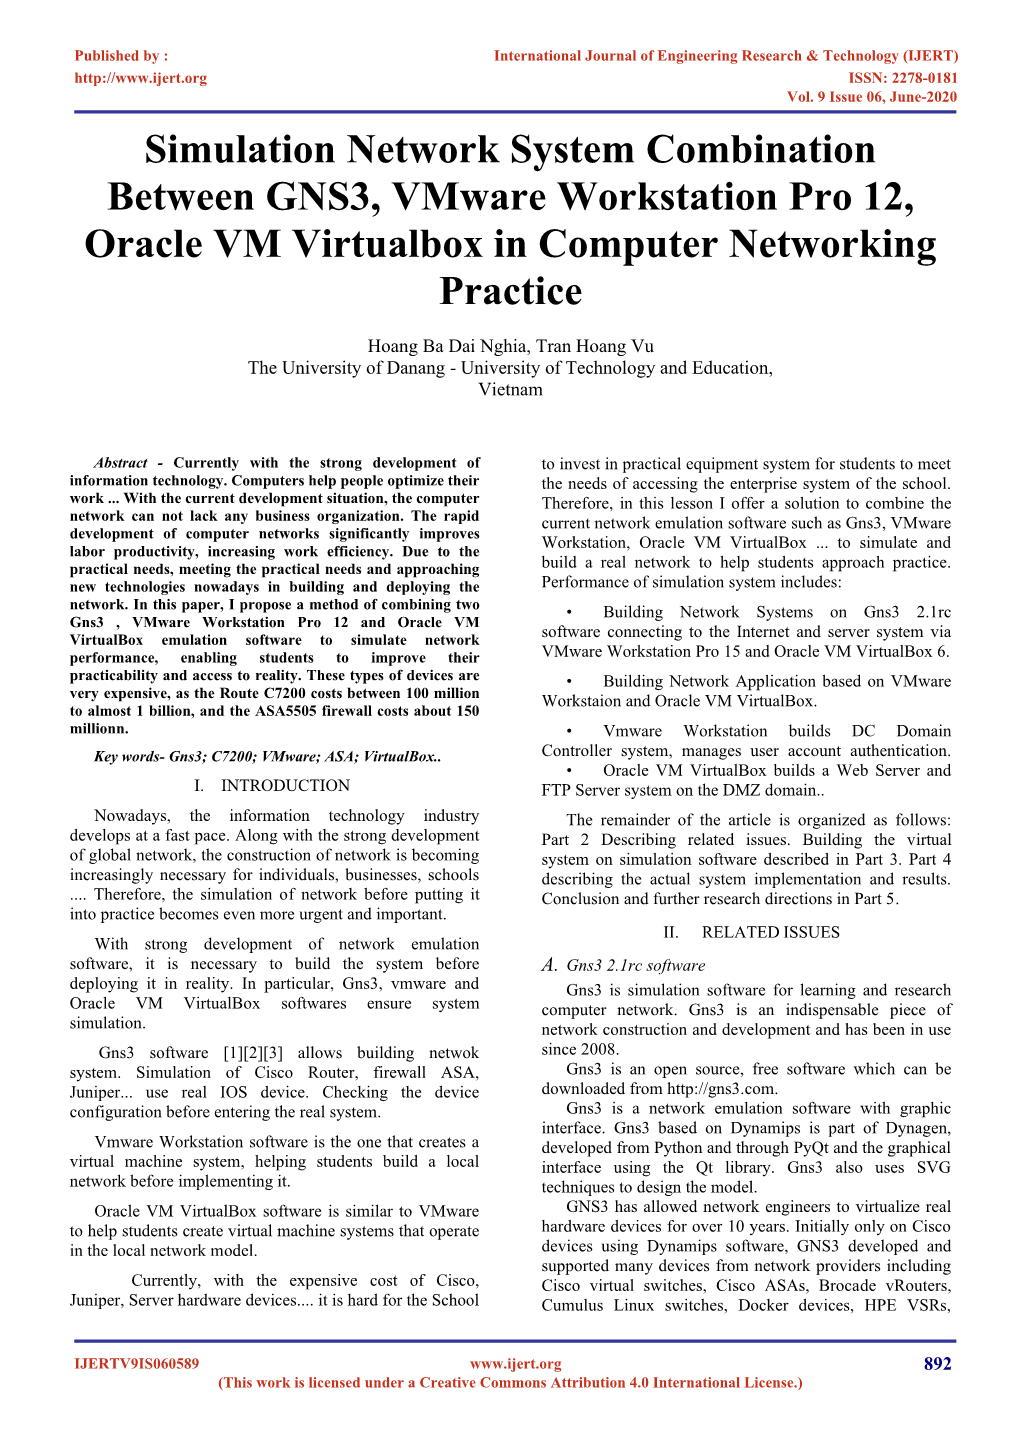 Simulation Network System Combination Between GNS3, Vmware Workstation Pro 12, Oracle VM Virtualbox in Computer Networking Practice